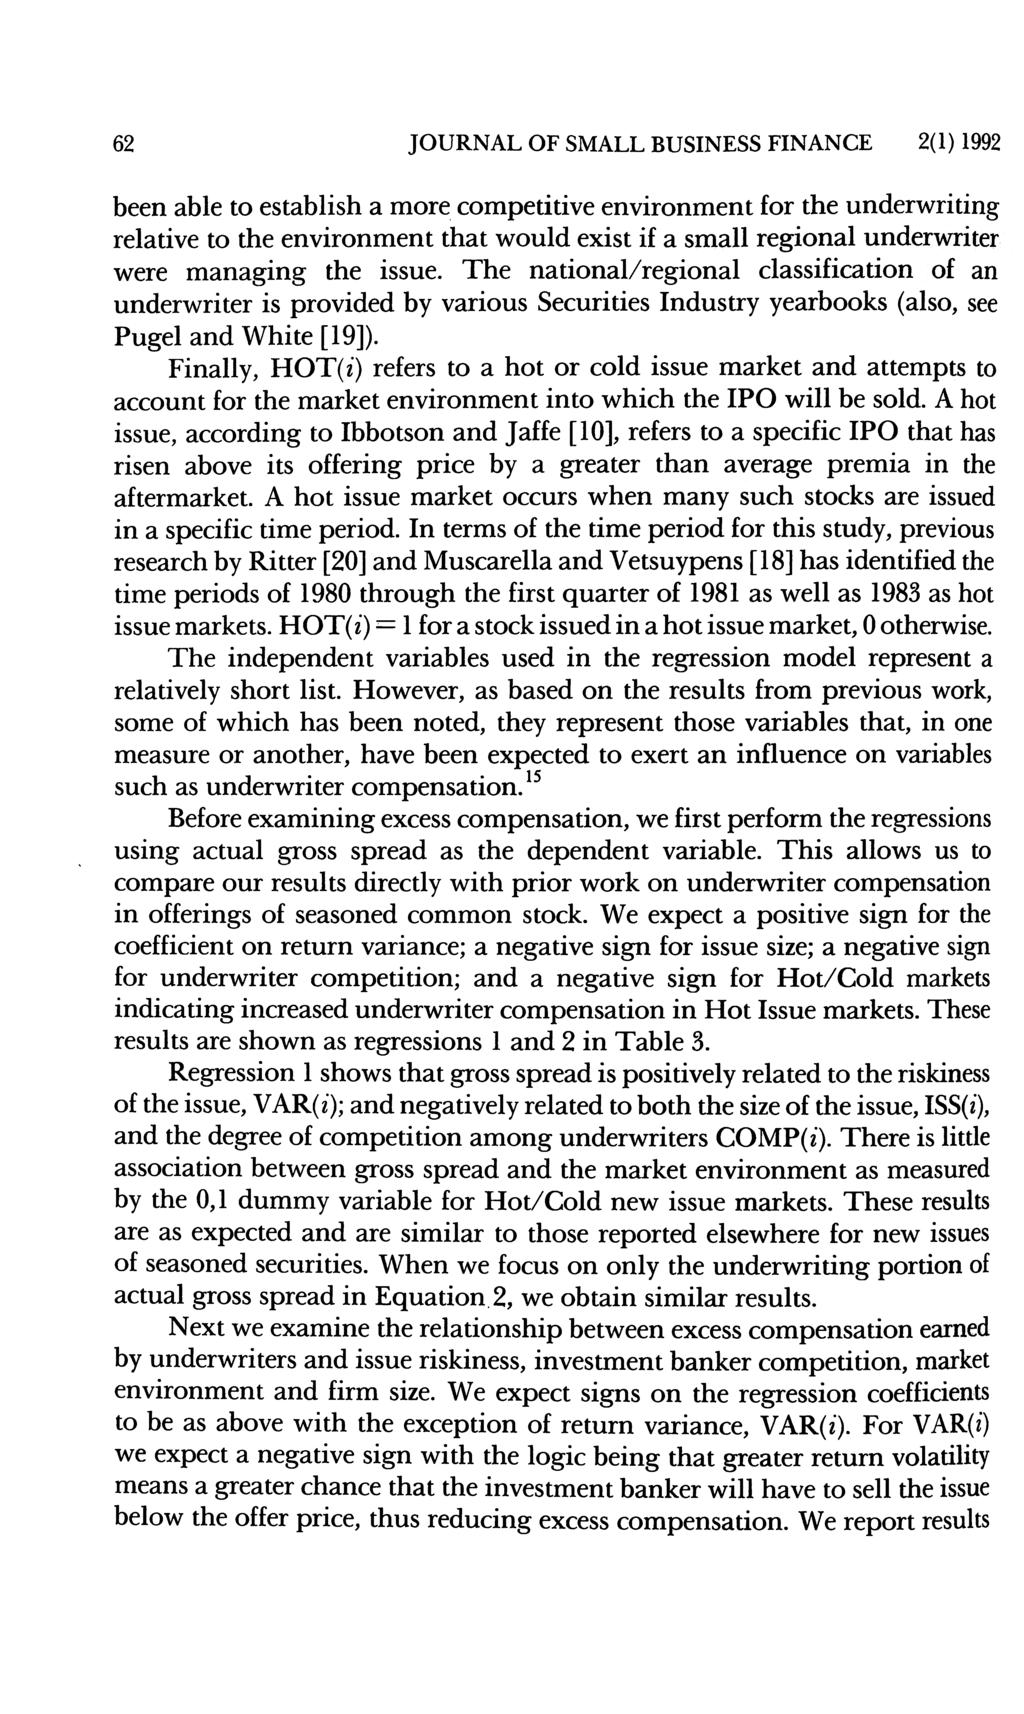 62 JOURNAL OF SMALL BUSINESS FINANCE 2(1)1992 been able to establish a more competitive environment for the underwriting relative to the environment that would exist if a small regional underwriter